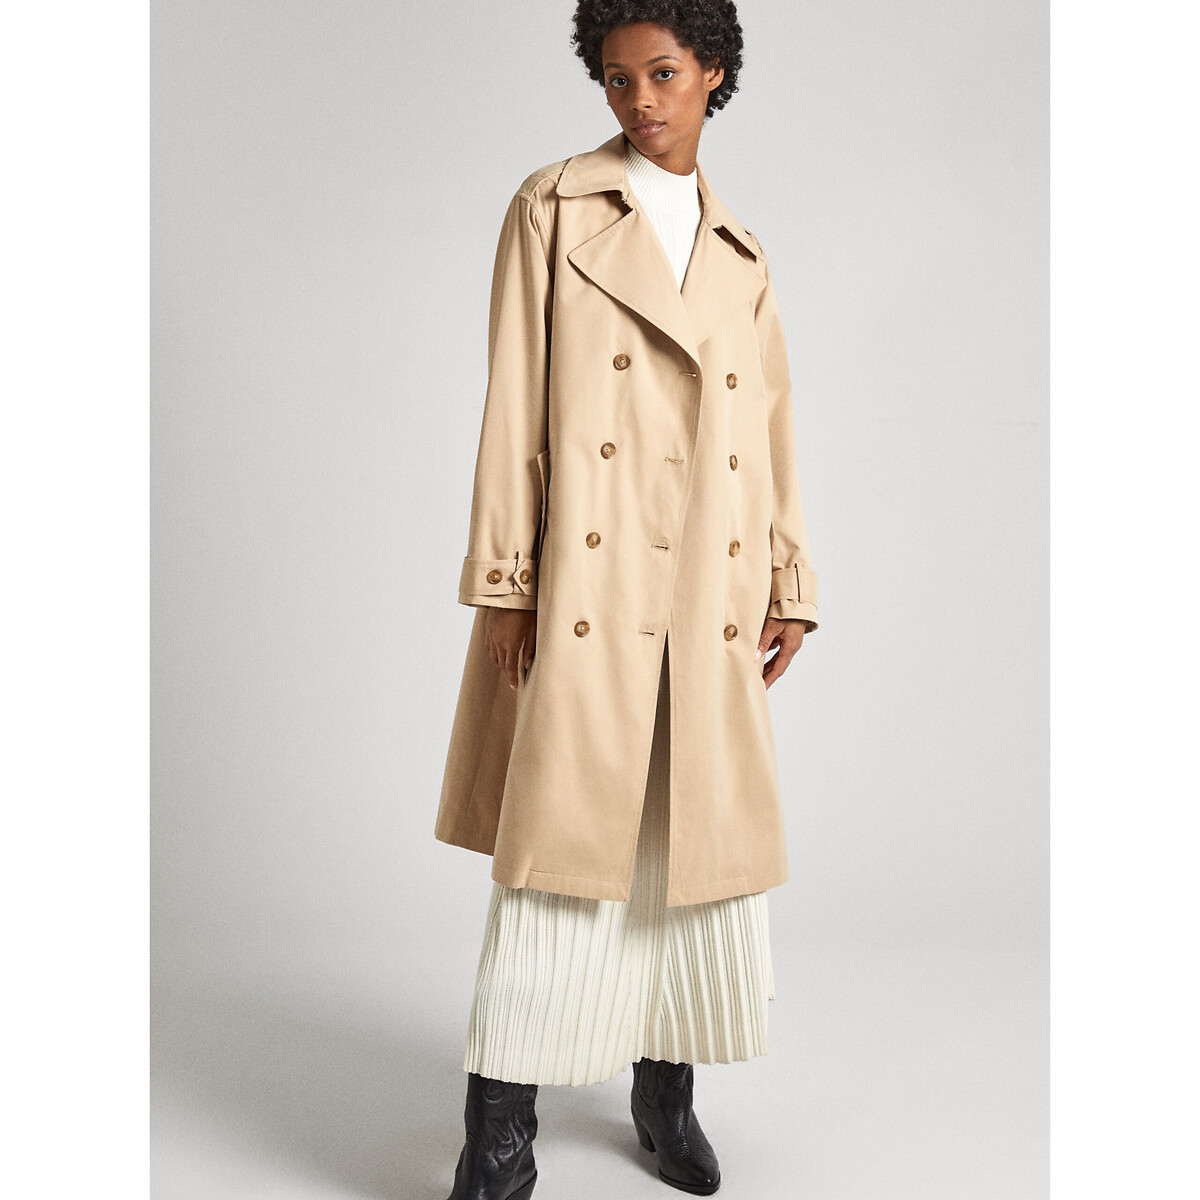 Image of Long Trench Coat with Tie-Waist